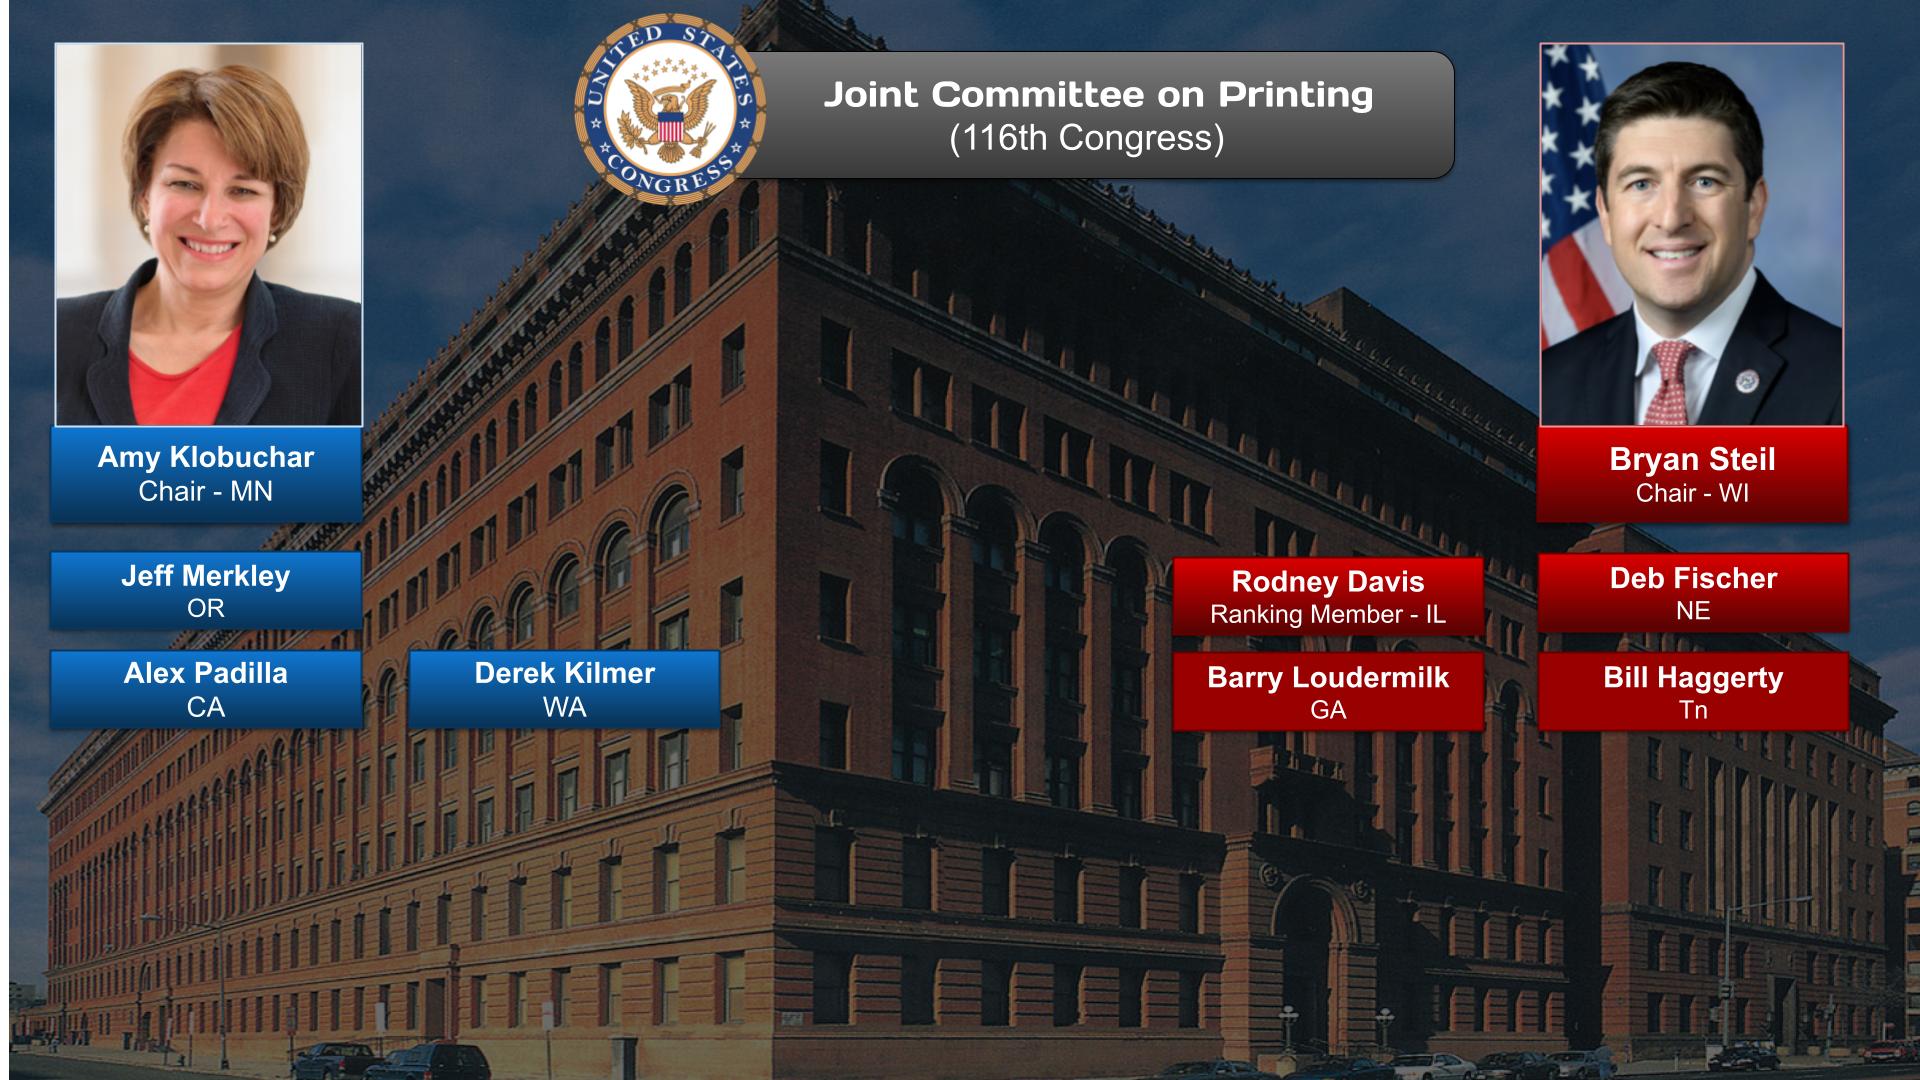 Joint Committee on Printing